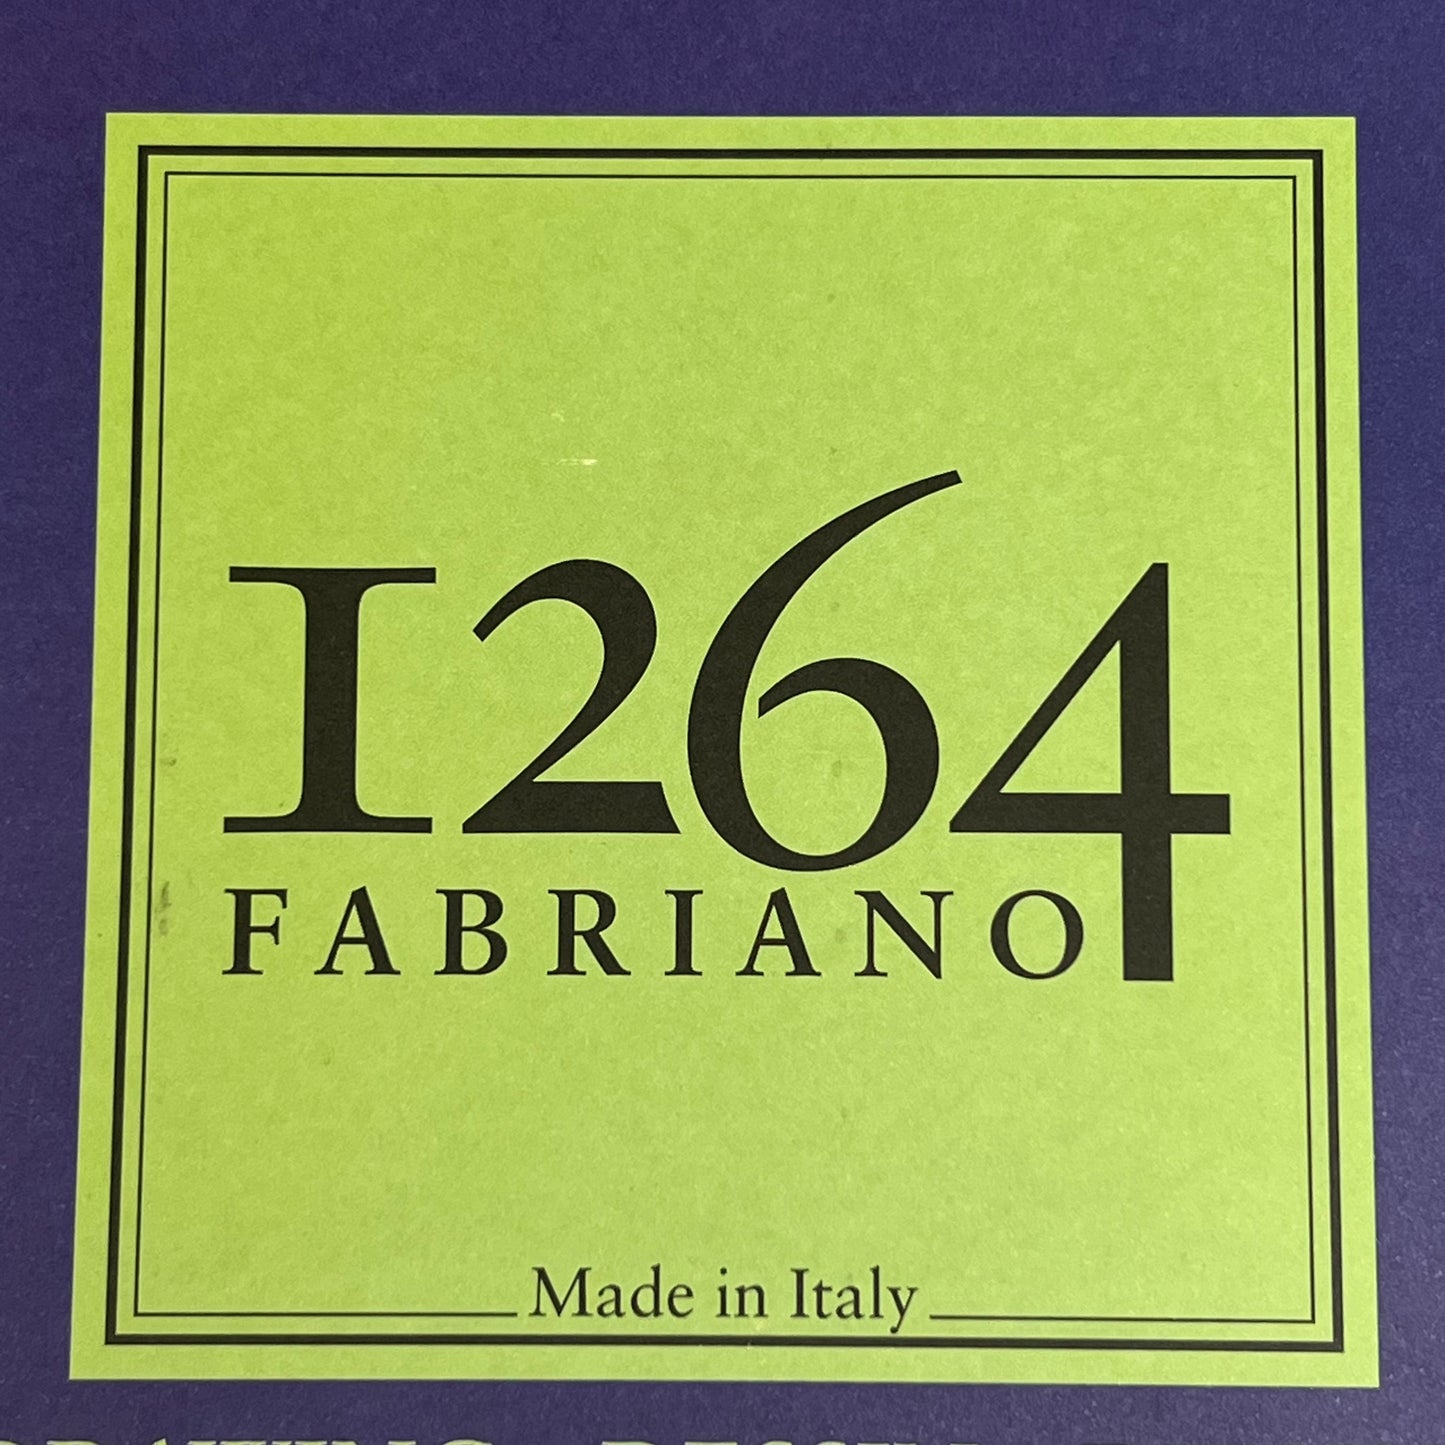 FABRIANO 5PK I264 Drawing Paper 11in x 14in 50 Sheets 250 Total Sheets